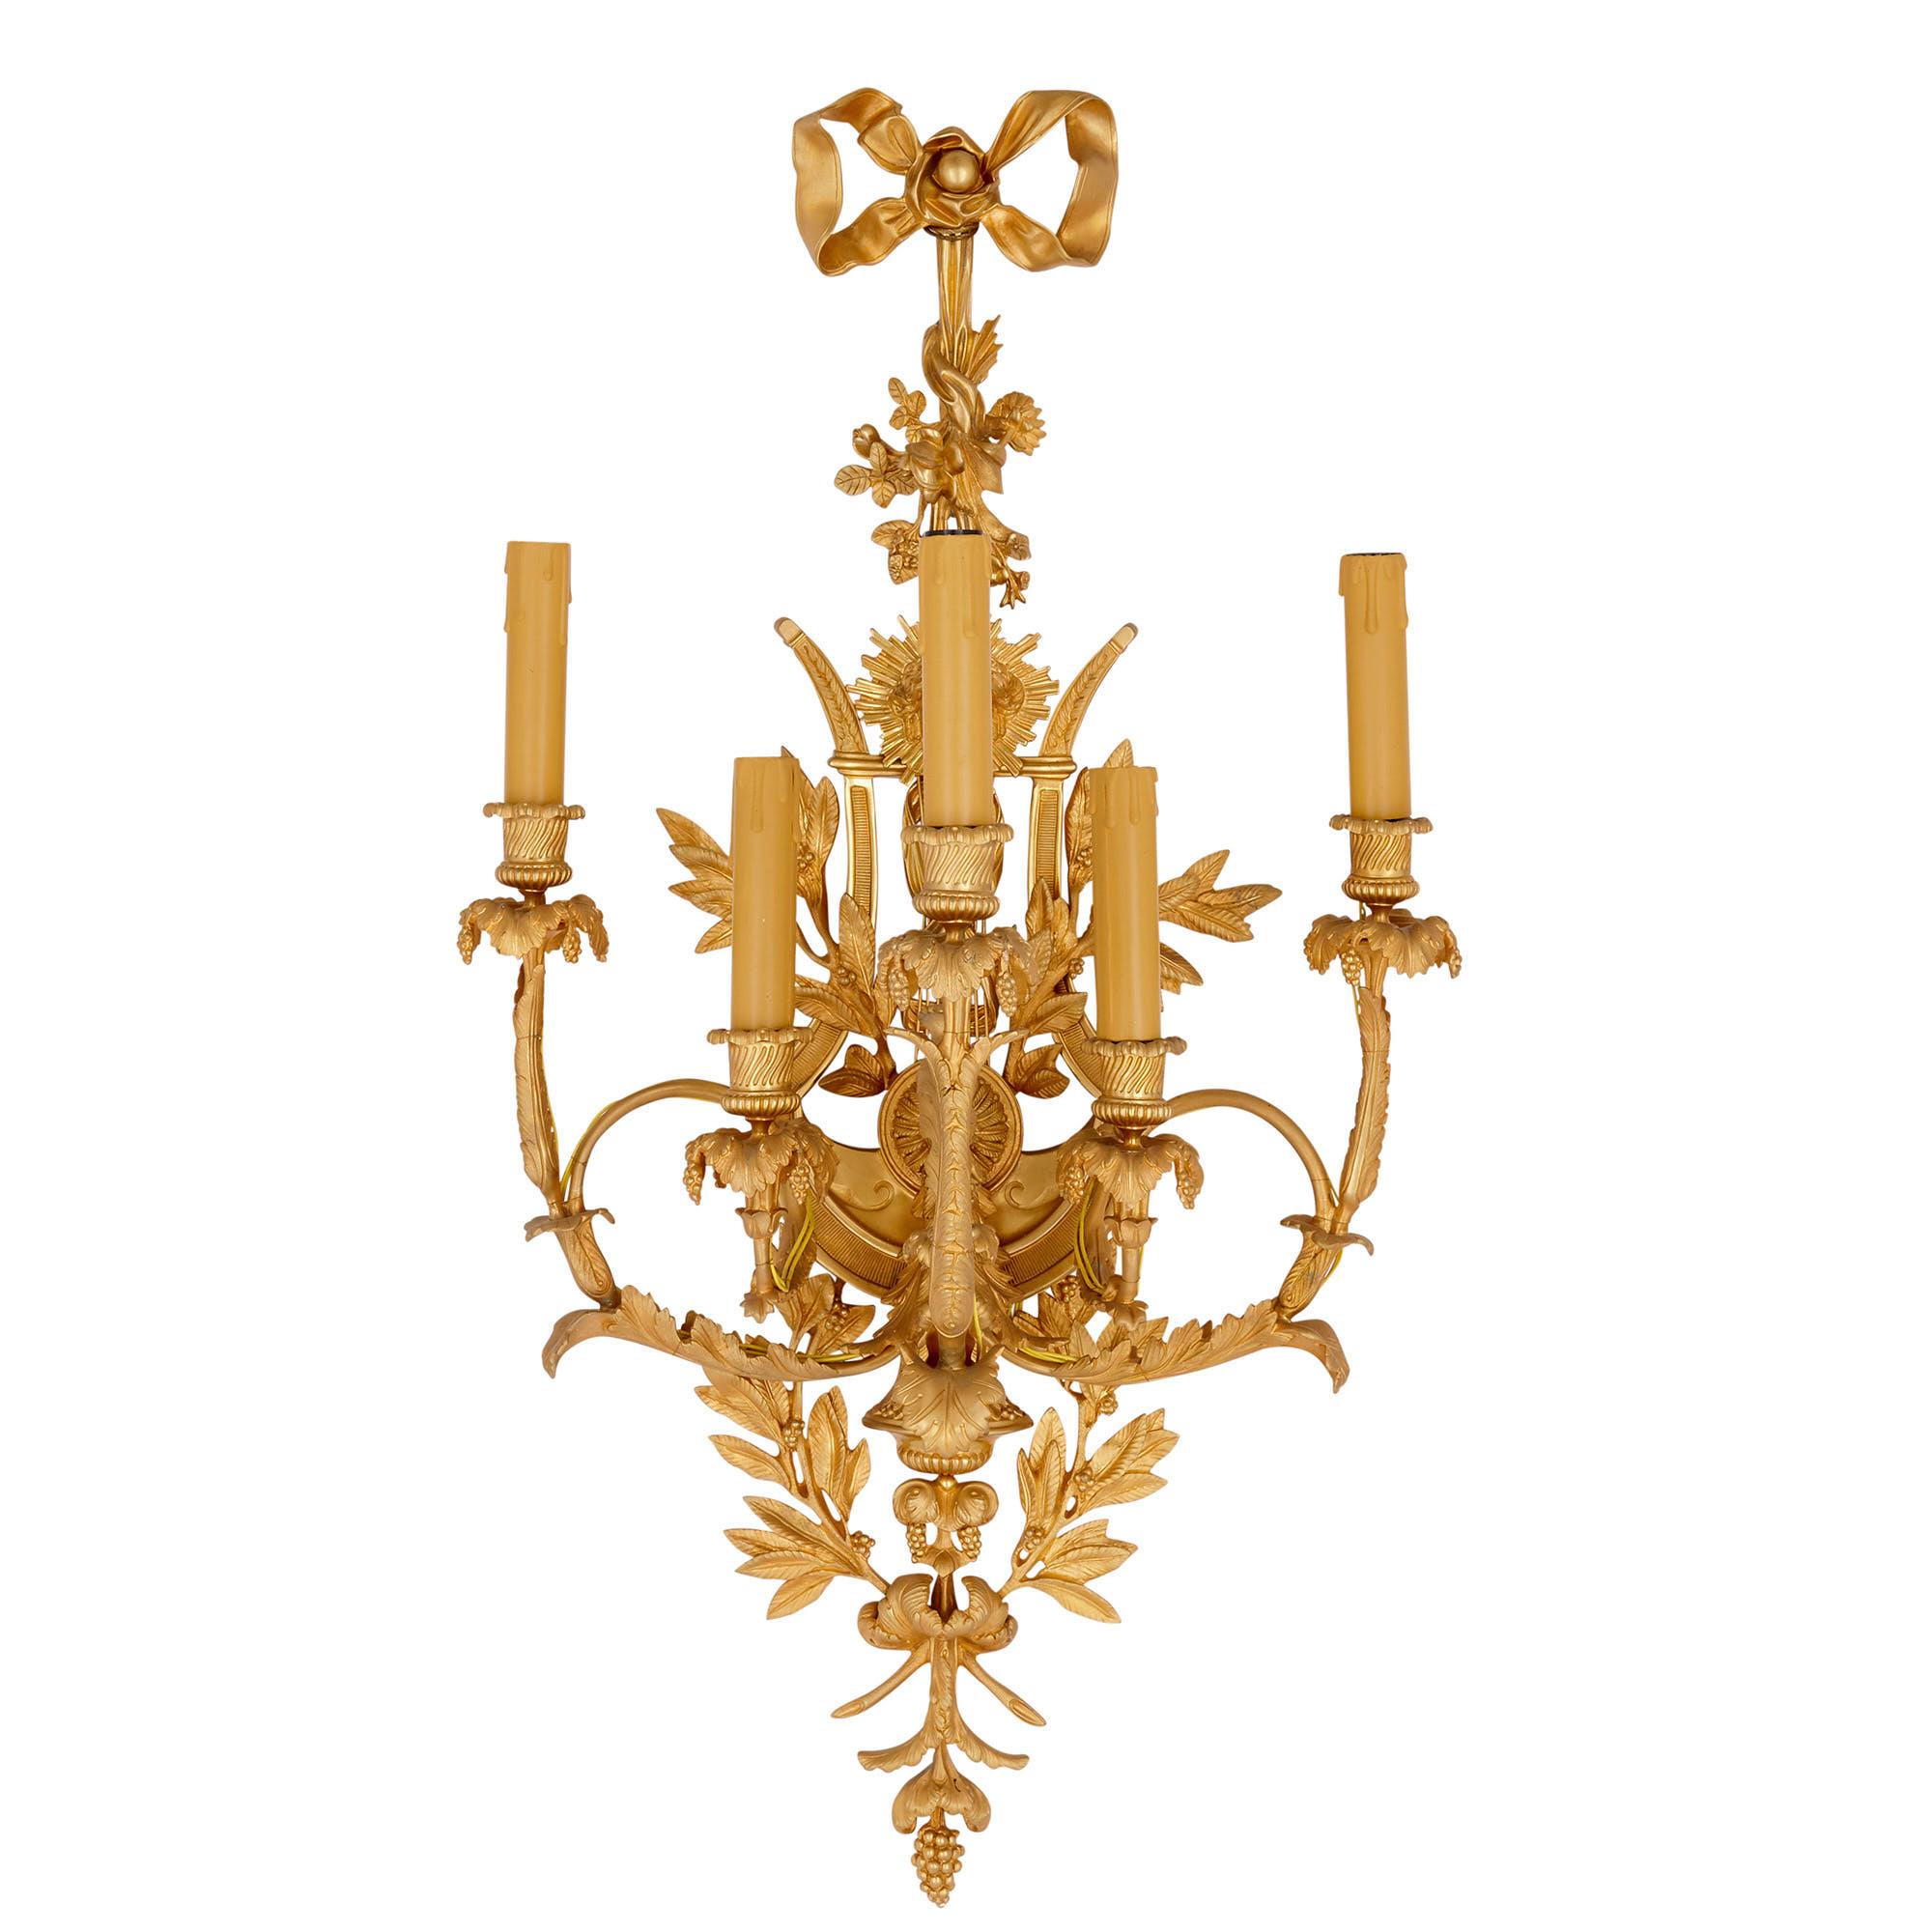 Pair of Louis XVI style gilt bronze sconces
French, 20th century
Dimensions: Height 94cm, width 49cm, depth 33cm

This pair of wall lights are superbly wrought in bronze, and feature exceptionally fine gilding. Each light is supported by a